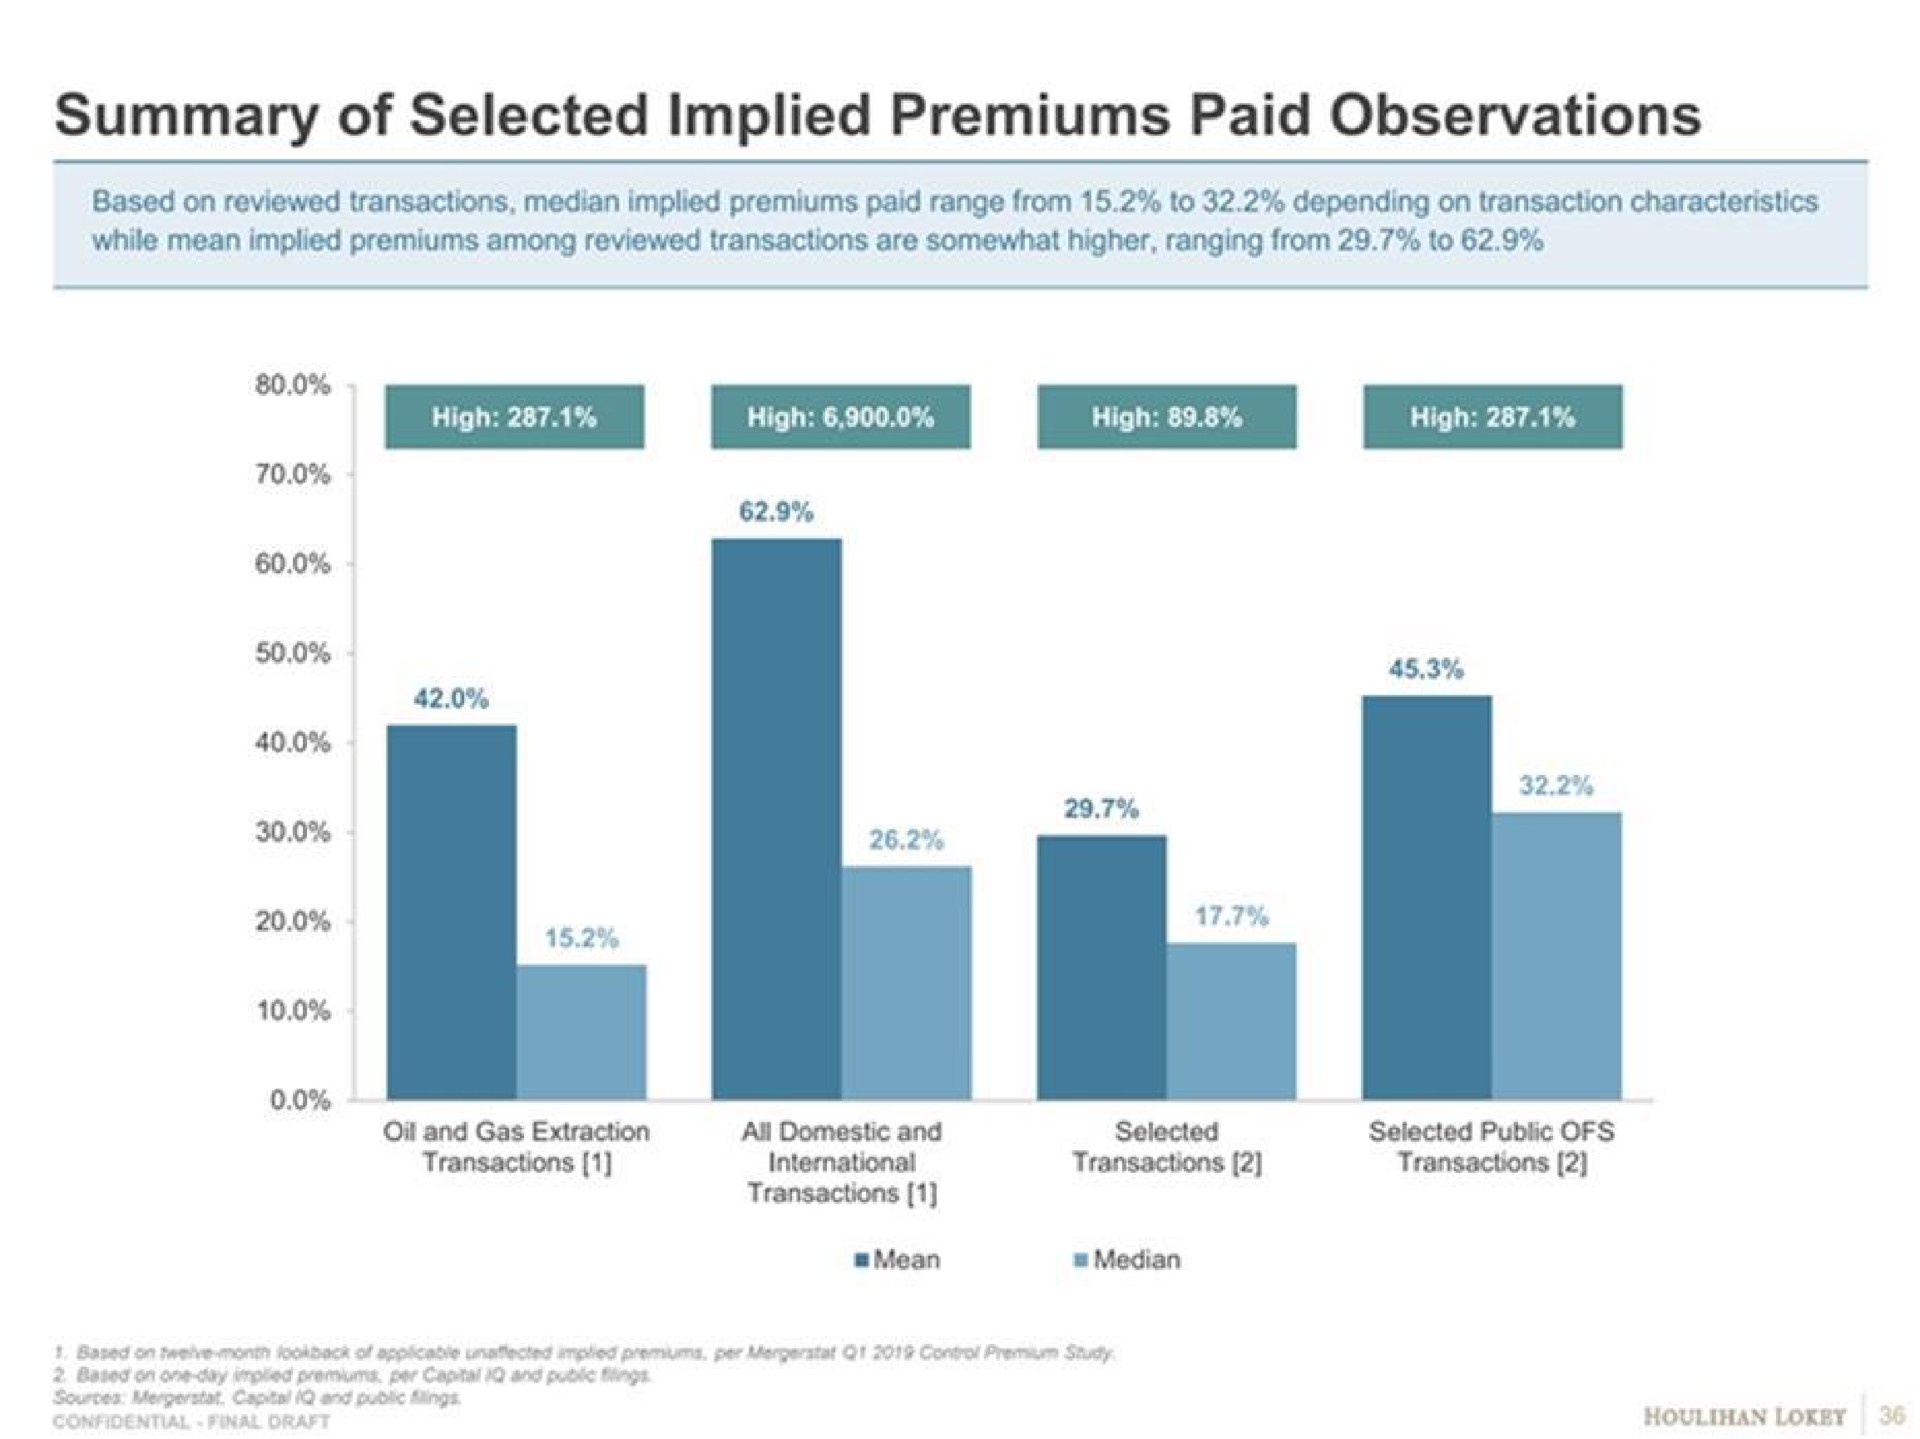 summary of selected implied premiums paid observations | Goldman Sachs